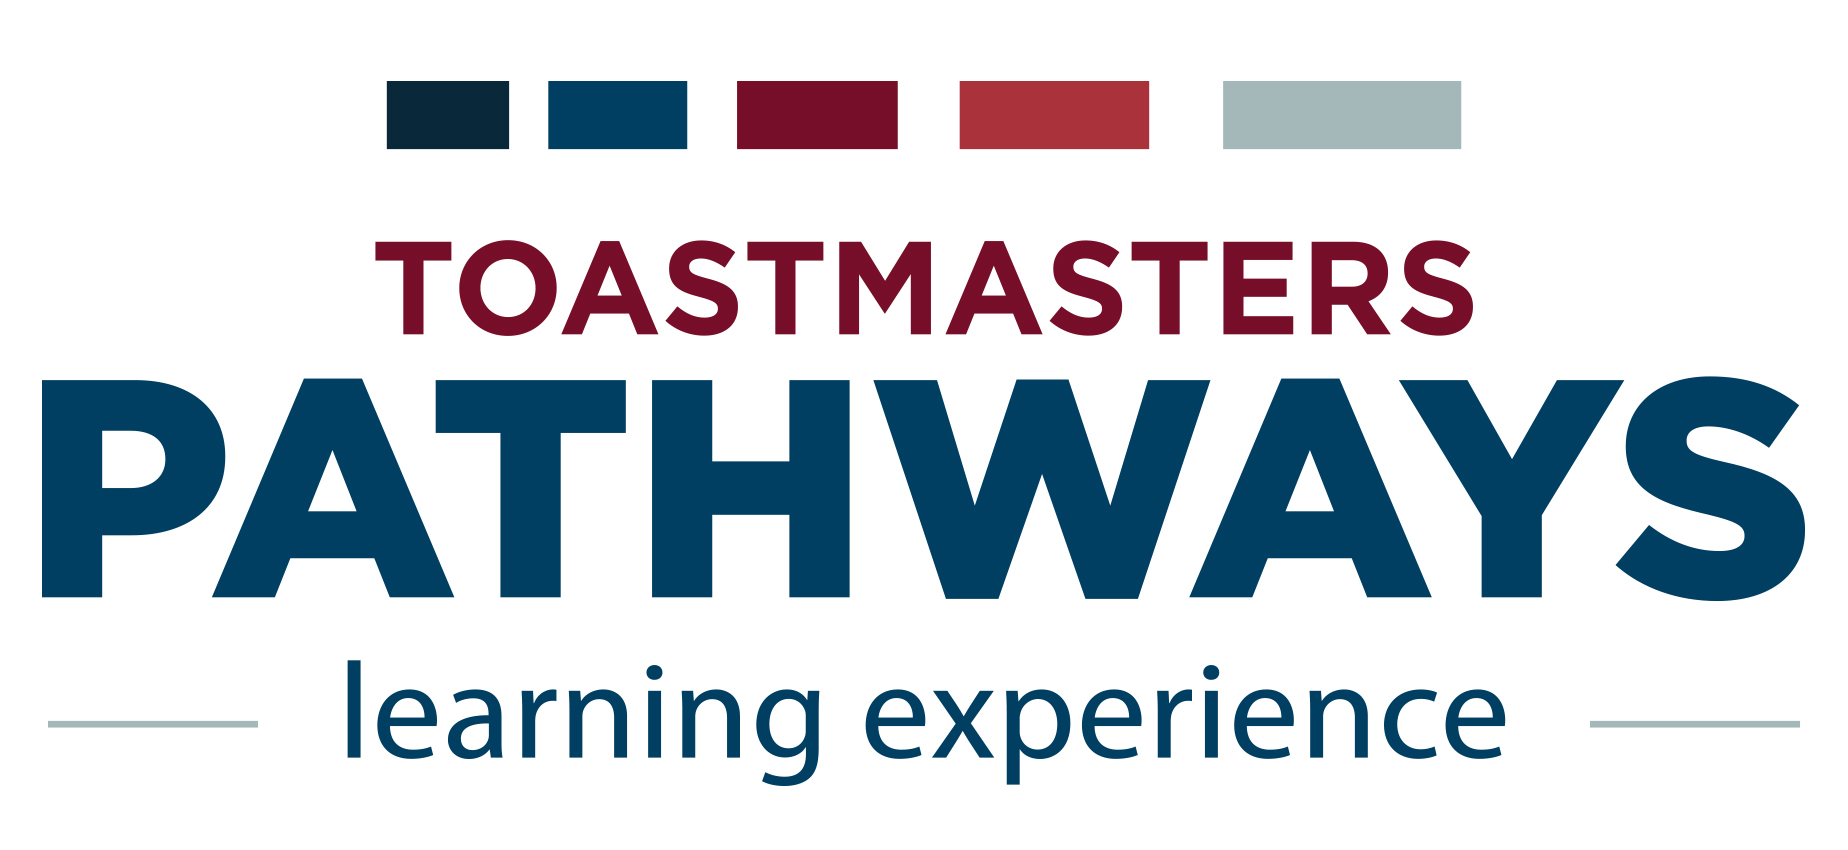 Toastmasters Pathways Learning Experience